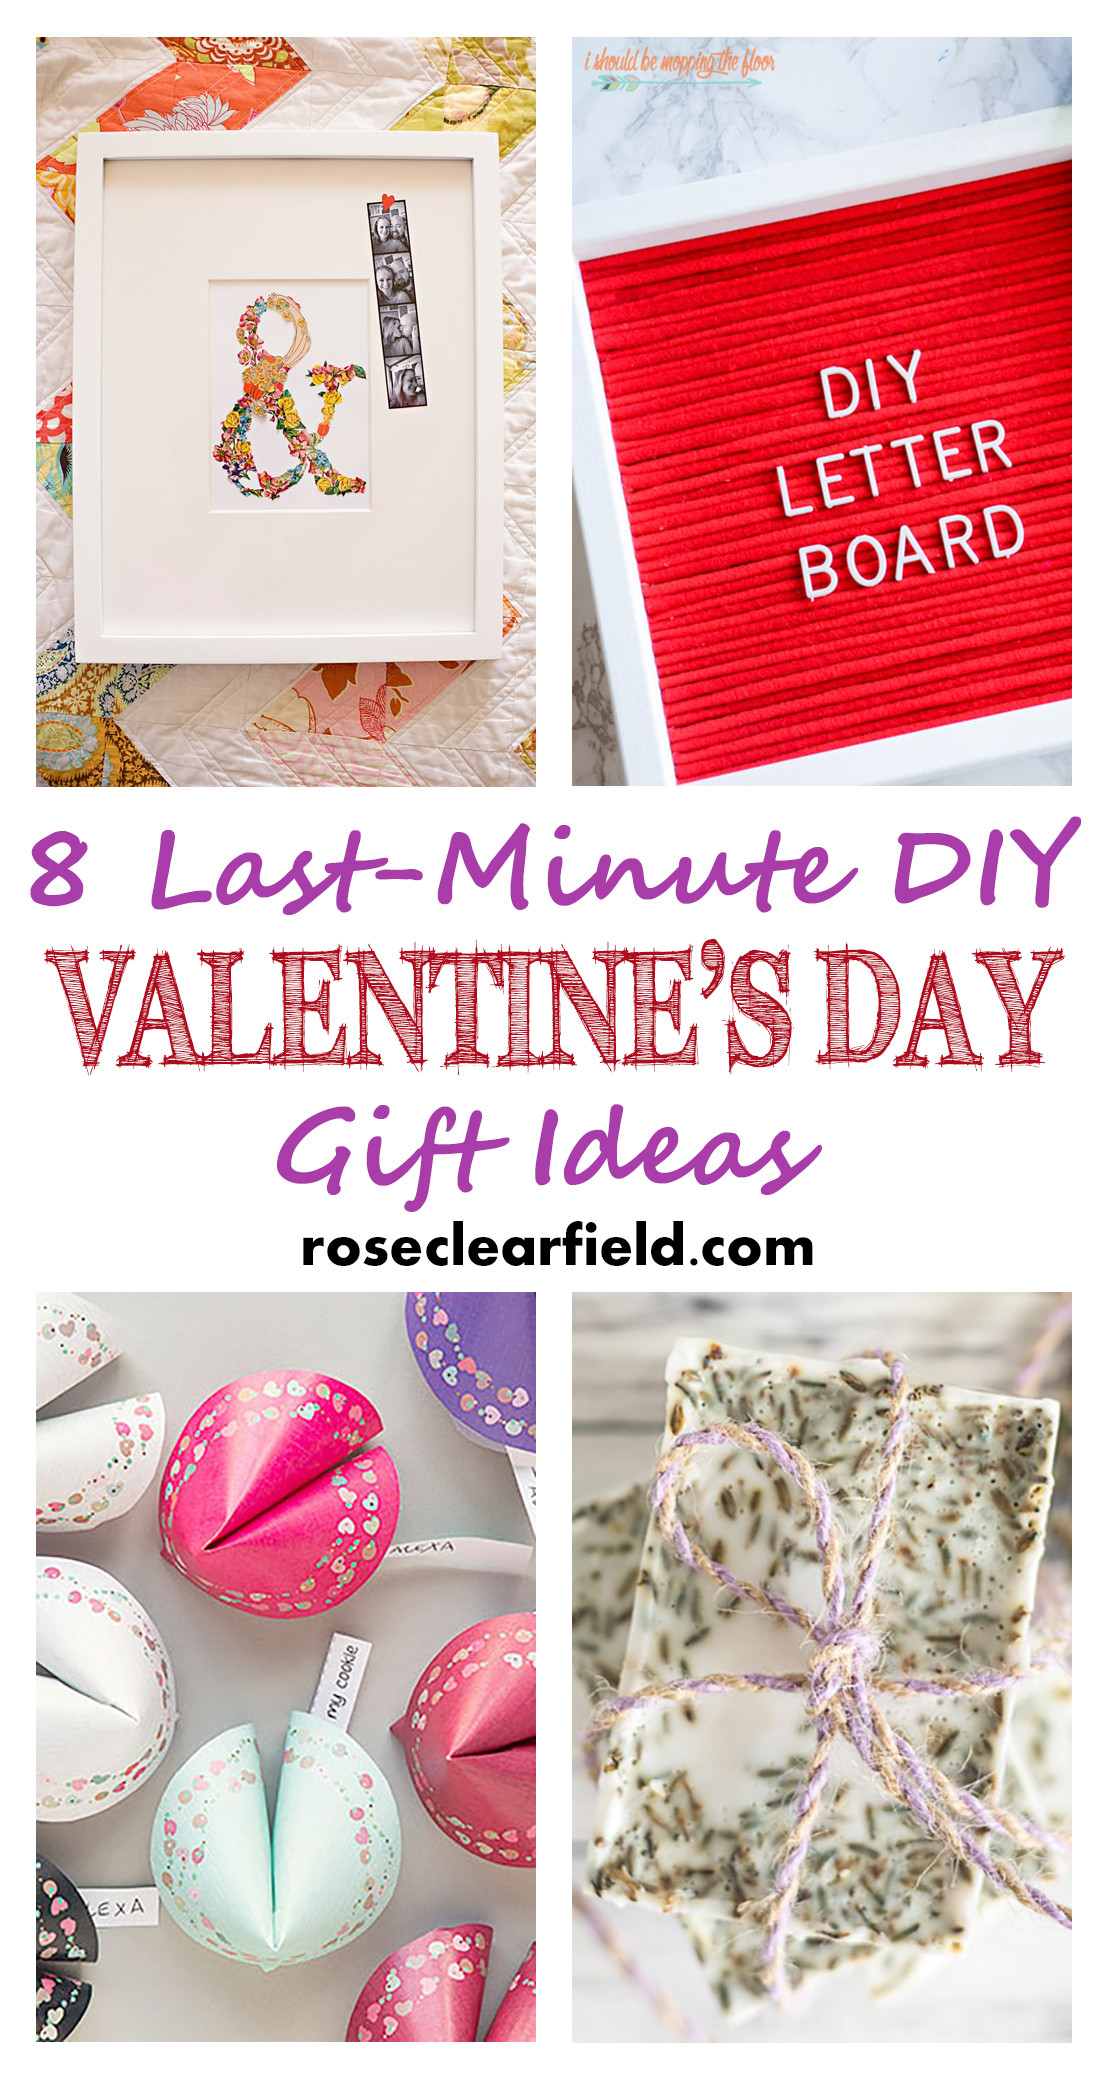 Valentine Day Gift Ideas
 Last Minute DIY Valentine s Day Gift Ideas • Rose Clearfield